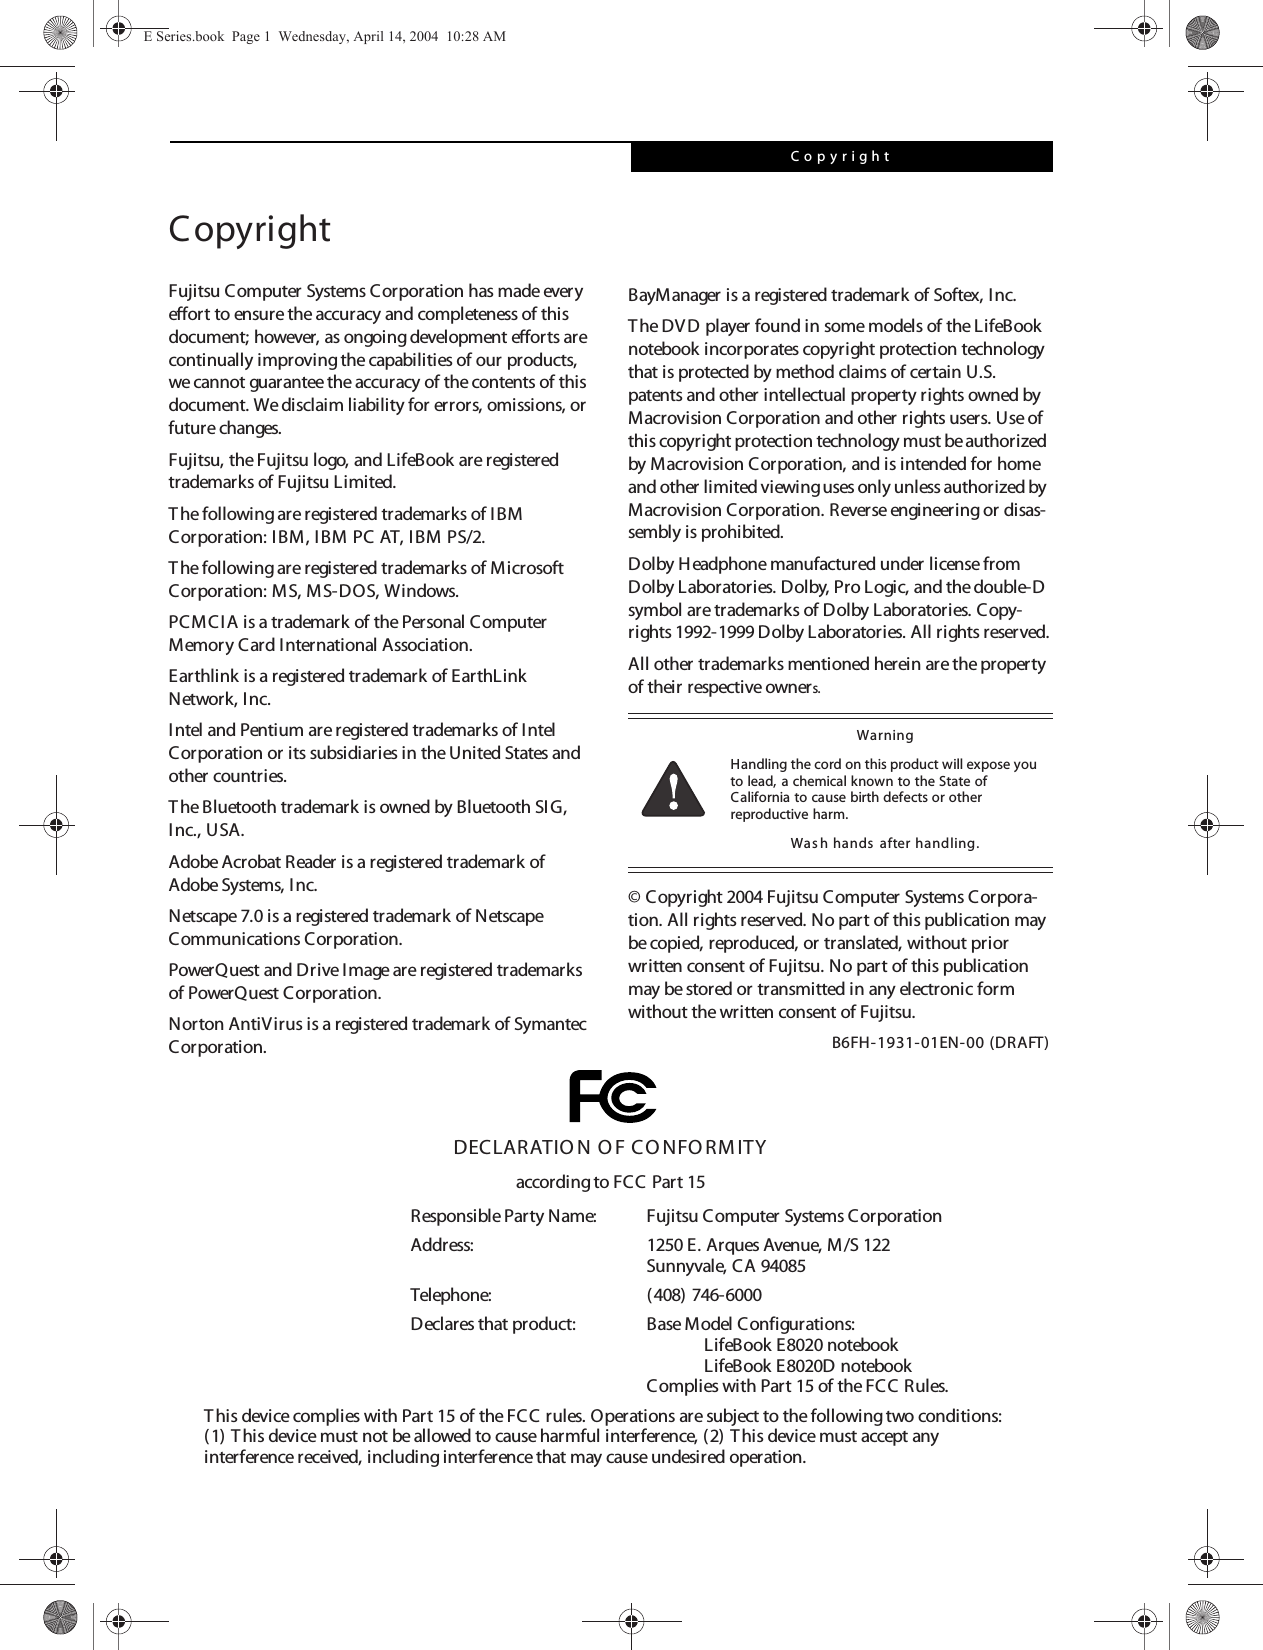 CopyrightCopyrightFujitsu Computer Systems Corporation has made every effort to ensure the accuracy and completeness of this document; however, as ongoing development efforts are continually improving the capabilities of our products, we cannot guarantee the accuracy of the contents of this document. We disclaim liability for errors, omissions, or future changes.Fujitsu, the Fujitsu logo, and LifeBook are registered trademarks of Fujitsu Limited.The following are registered trademarks of IBM Corporation: IBM, IBM PC AT, IBM PS/2. The following are registered trademarks of Microsoft Corporation: MS, MS-DOS, Windows.PCMCIA is a trademark of the Personal Computer Memory Card International Association.Earthlink is a registered trademark of EarthLink Network, Inc. Intel and Pentium are registered trademarks of Intel Corporation or its subsidiaries in the United States and other countries.The Bluetooth trademark is owned by Bluetooth SIG, Inc., USA.Adobe Acrobat Reader is a registered trademark of Adobe Systems, Inc.Netscape 7.0 is a registered trademark of Netscape Communications Corporation.PowerQuest and Drive Image are registered trademarks of PowerQuest Corporation.Norton AntiVirus is a registered trademark of Symantec Corporation.BayManager is a registered trademark of Softex, Inc.The DVD player found in some models of the LifeBook notebook incorporates copyright protection technology that is protected by method claims of certain U.S. patents and other intellectual property rights owned by Macrovision Corporation and other rights users. Use of this copyright protection technology must be authorized by Macrovision Corporation, and is intended for home and other limited viewing uses only unless authorized by Macrovision Corporation. Reverse engineering or disas-sembly is prohibited.Dolby Headphone manufactured under license from Dolby Laboratories. Dolby, Pro Logic, and the double-D symbol are trademarks of Dolby Laboratories. Copy-rights 1992-1999 Dolby Laboratories. All rights reserved.All other trademarks mentioned herein are the property of their respective owners.© Copyright 2004 Fujitsu Computer Systems Corpora-tion. All rights reserved. No part of this publication may be copied, reproduced, or translated, without prior written consent of Fujitsu. No part of this publication may be stored or transmitted in any electronic form without the written consent of Fujitsu.B6FH-1931-01EN-00 (DRAFT)War ningHandling the cord on this product will expose you to lead, a chemical known to the State of California to cause birth defects or other reproductive harm. Was h hands  after handling.DECLARATIO N O F CO NFO RM ITYaccording to FCC Part 15Responsible Party Name: Fujitsu Computer Systems CorporationAddress:  1250 E. Arques Avenue, M/S 122Sunnyvale, CA 94085Telephone: (408) 746-6000Declares that product: Base Model Configurations:LifeBook E8020 notebookLifeBook E8020D notebookComplies with Part 15 of the FCC Rules.This device complies with Part 15 of the FCC rules. Operations are subject to the following two conditions:(1) T his device must not be allowed to cause harmful interference, (2) This device must accept anyinterference received, including interference that may cause undesired operation.E Series.book  Page 1  Wednesday, April 14, 2004  10:28 AM